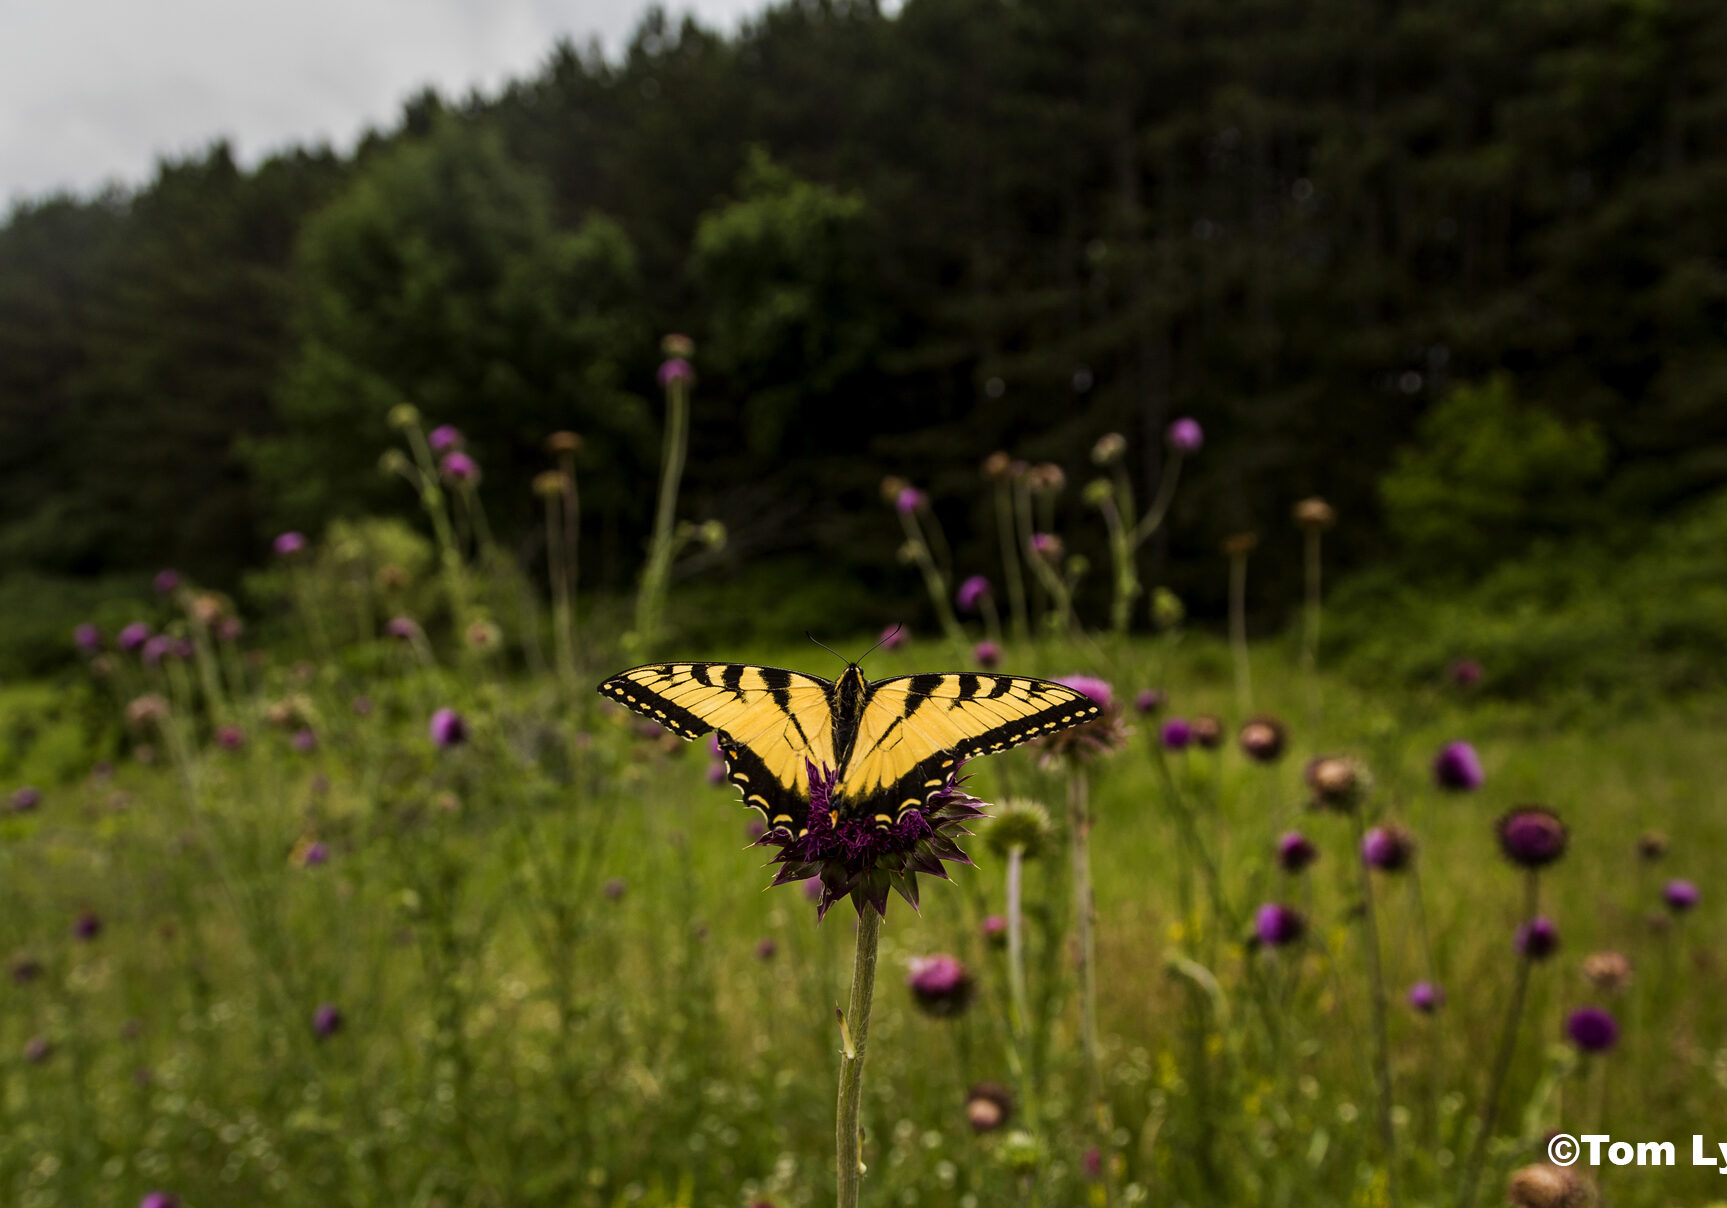 A Swallowtail butterfly sits atop a purple flower